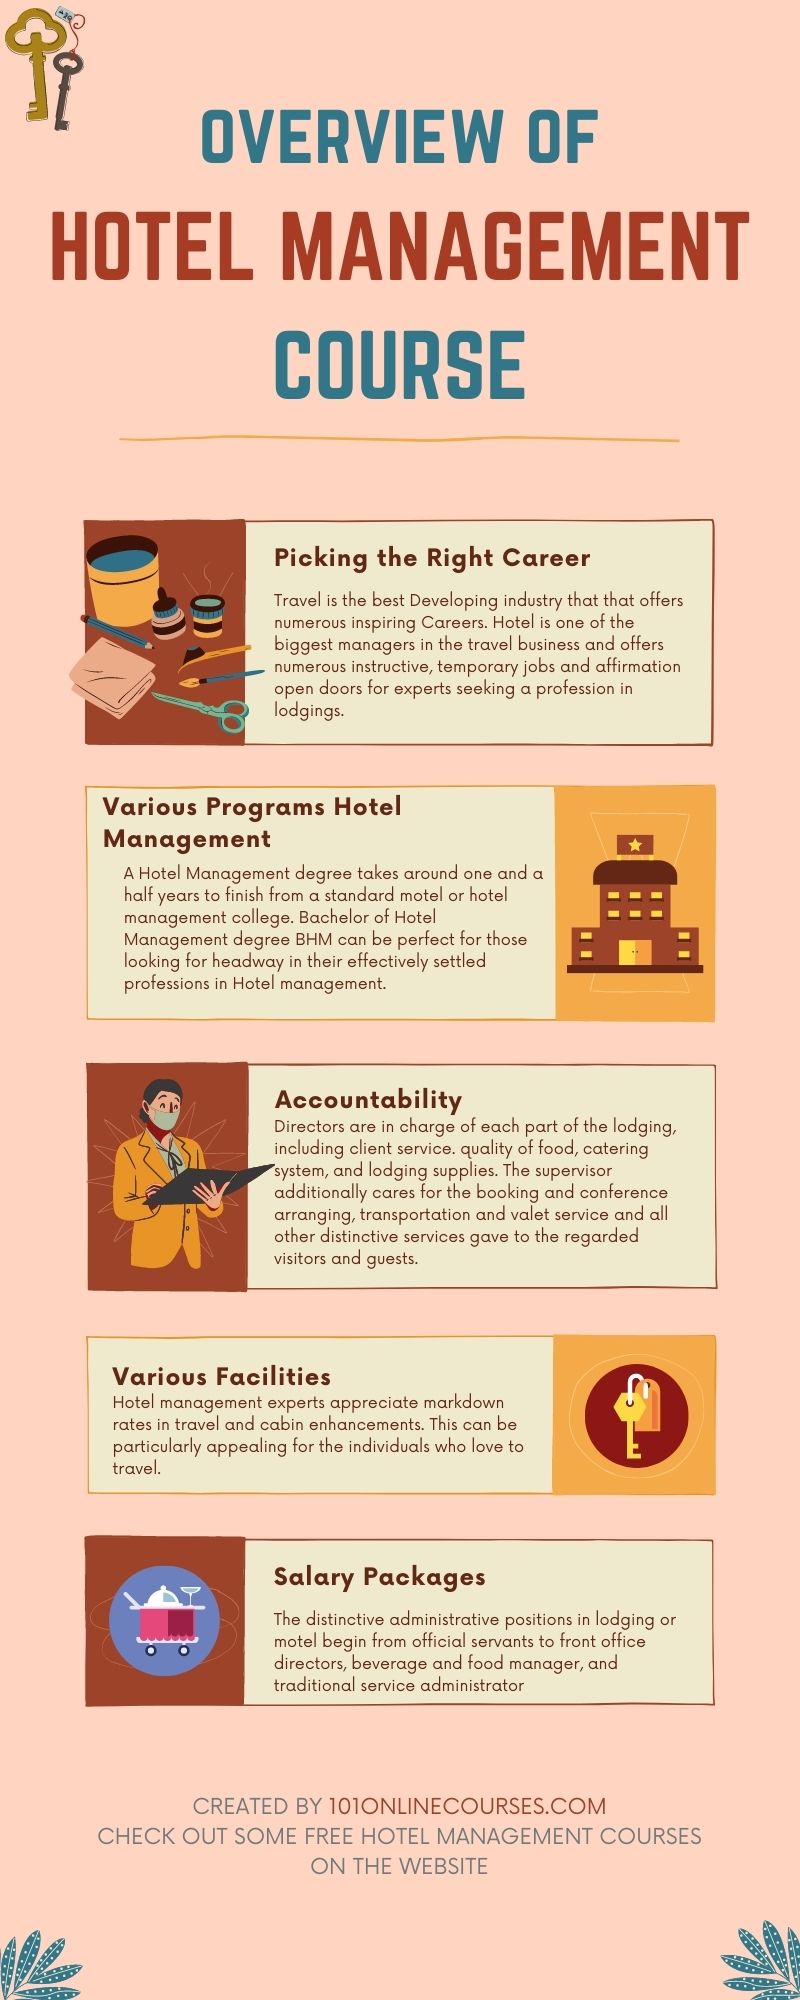 Hotel management courses overview